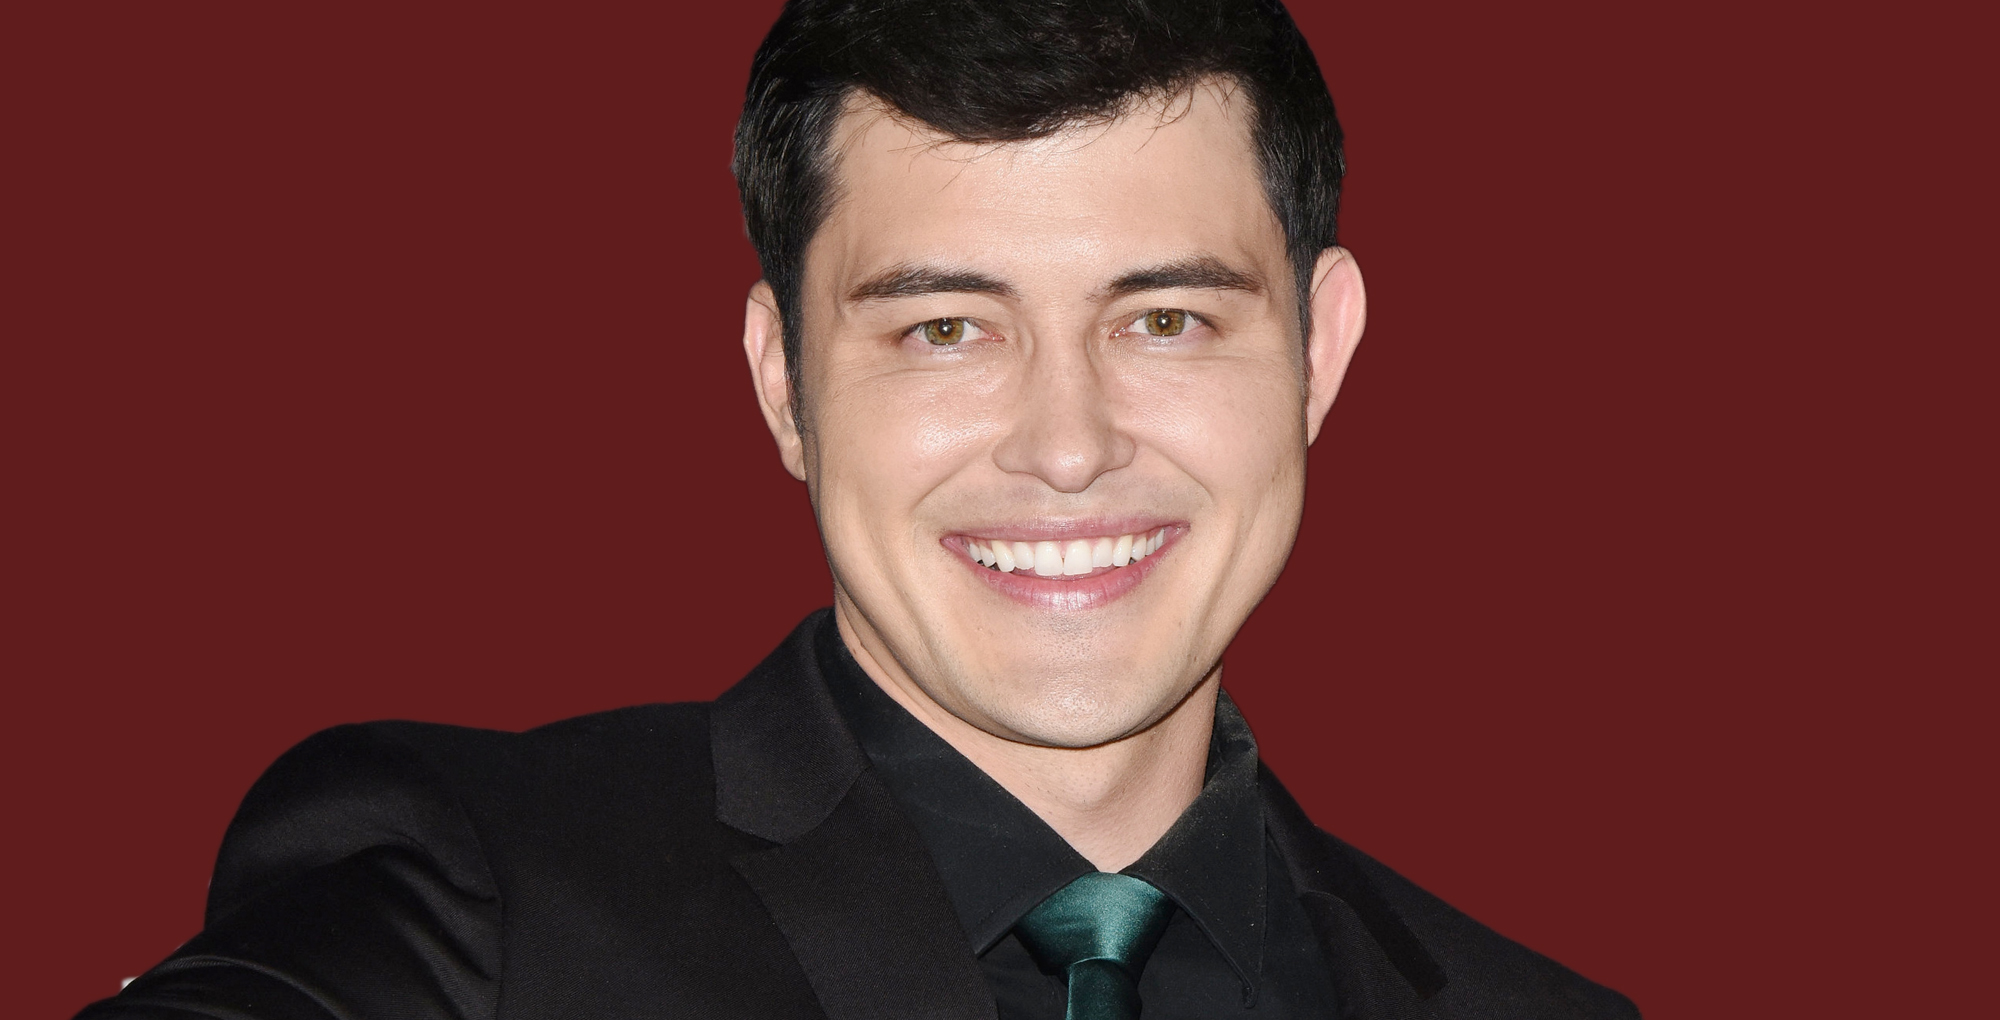 christopher sean plays paul on days of our lives.